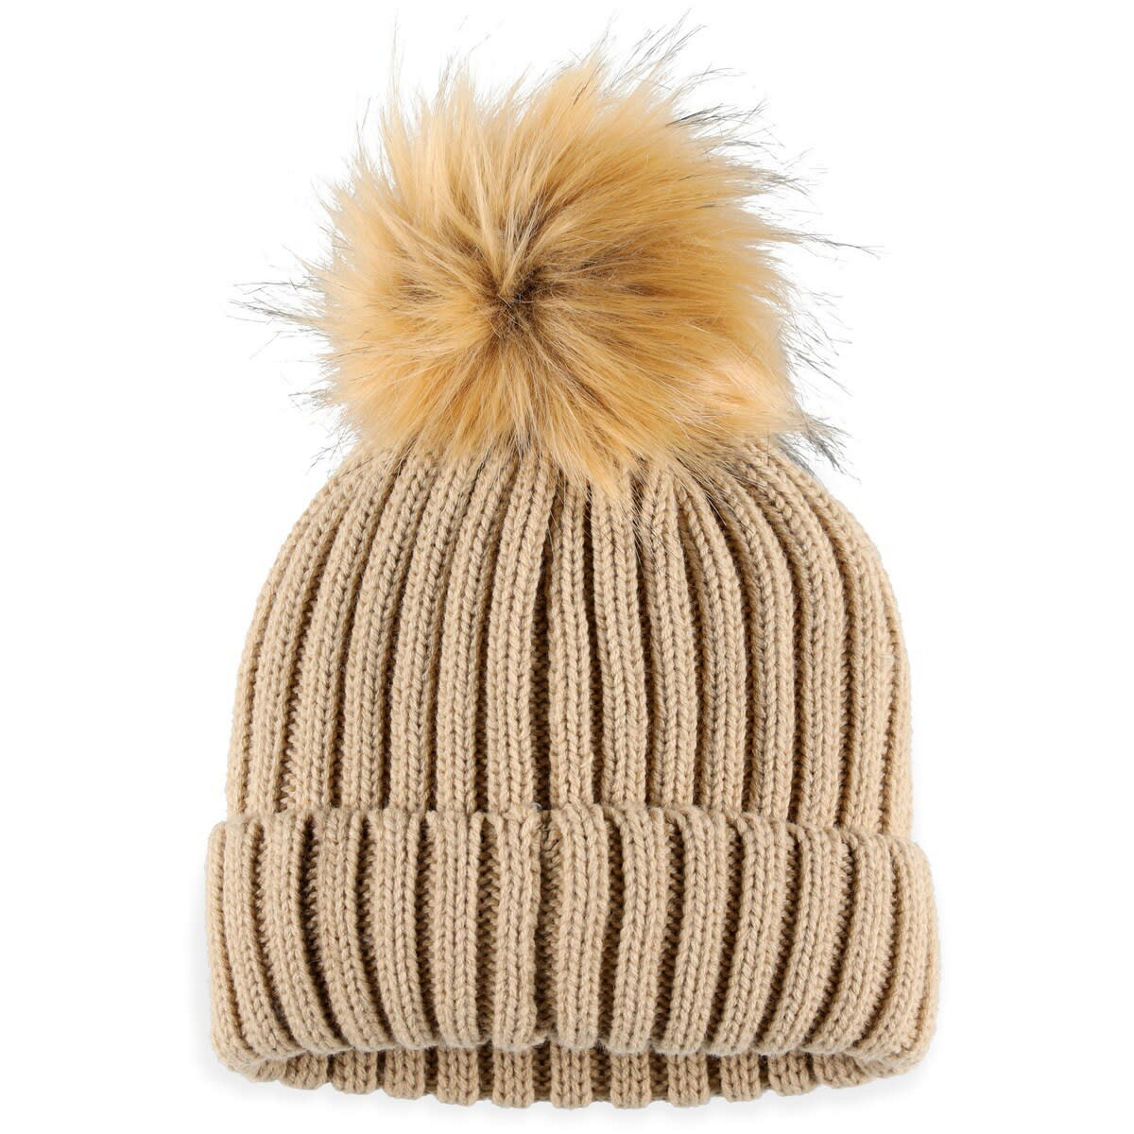 WEAR by Erin Andrews Women's Natural Buffalo Bills Neutral Cuffed Knit Hat with Pom - Image 3 of 3